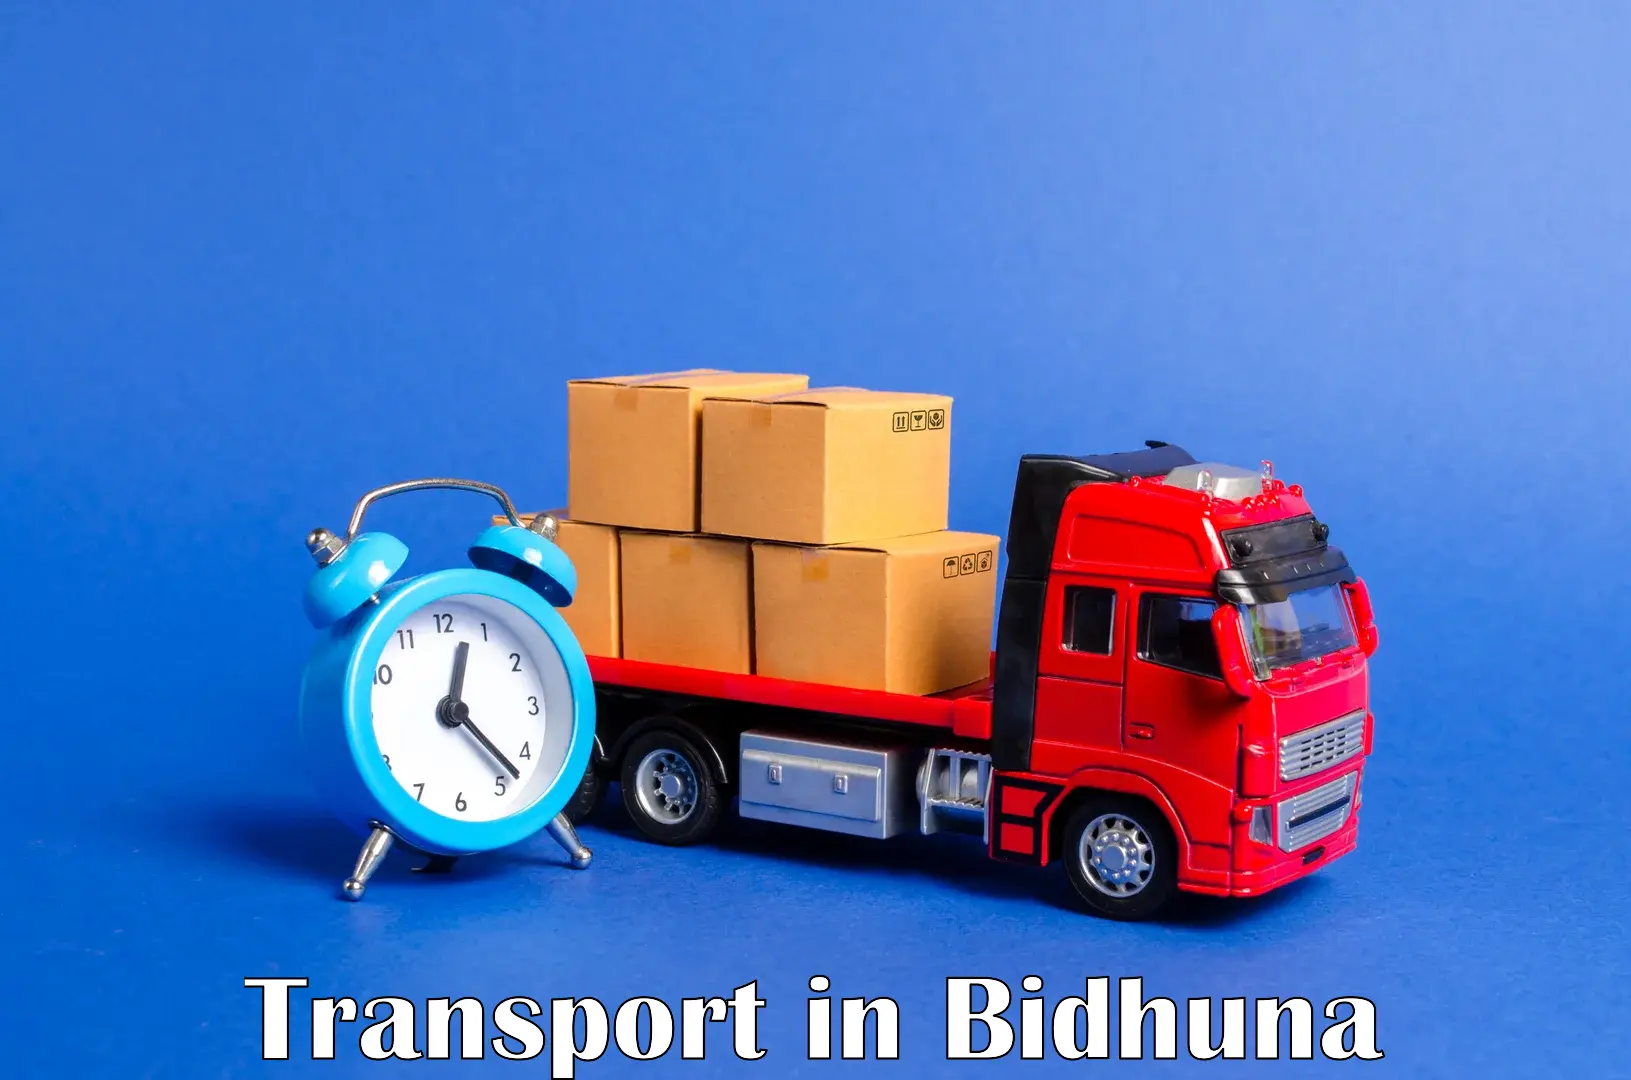 Air freight transport services in Bidhuna